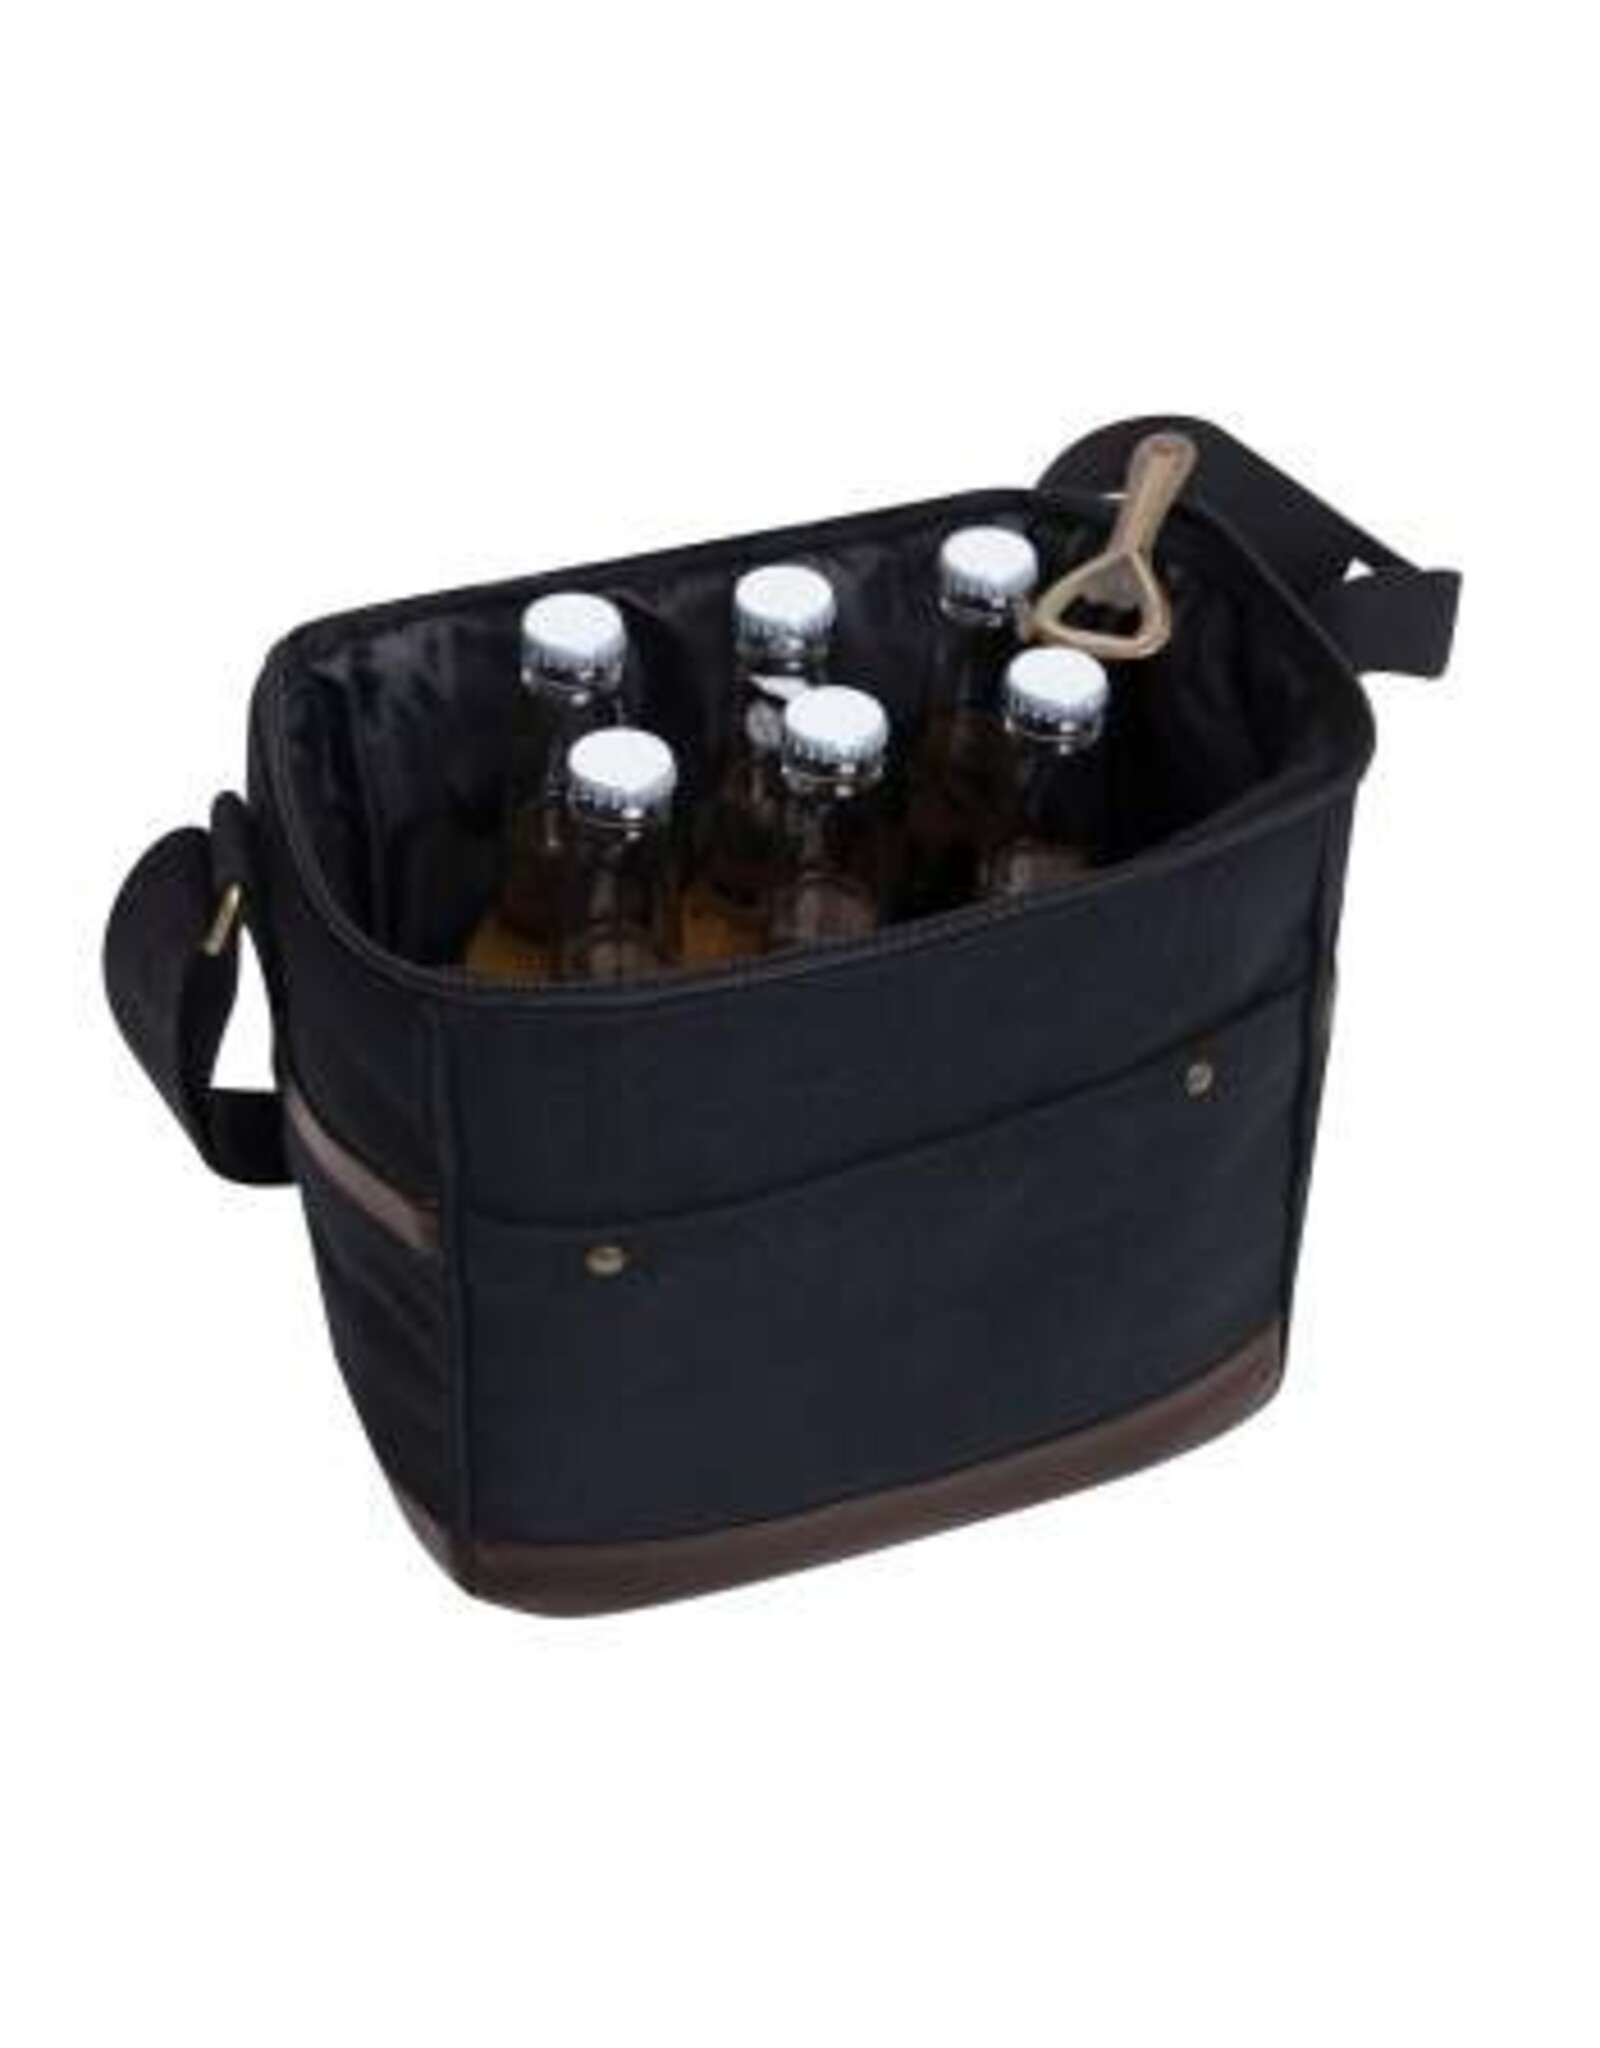 ROTHCO CANVAS INSULATED COOLER BAG